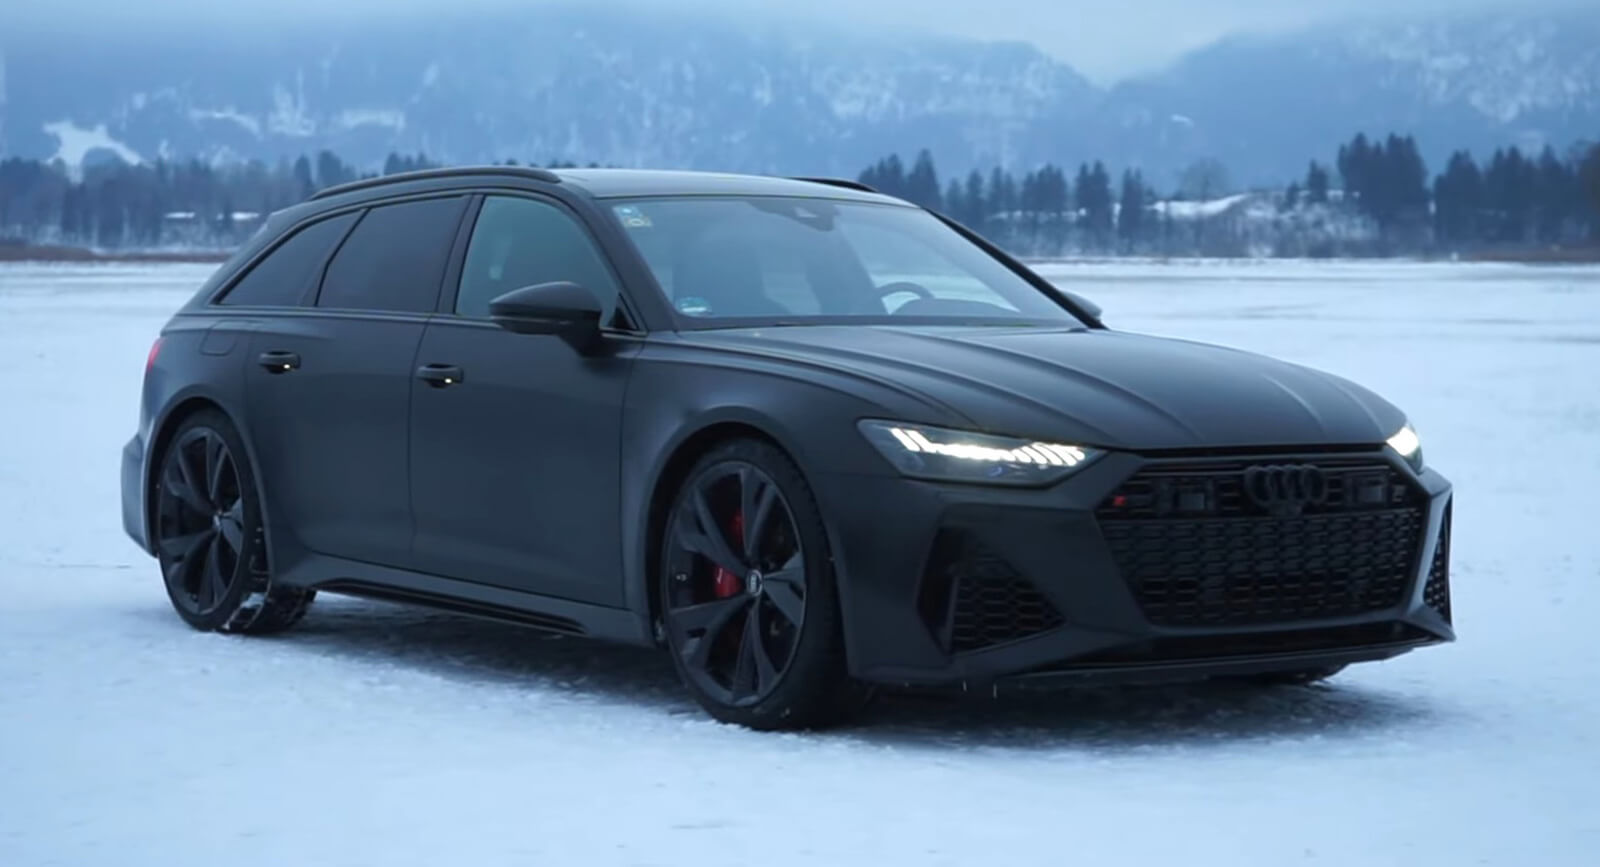 Blacked-Out Tuned 2021 Audi RS6 Avant Has The Looks And ...